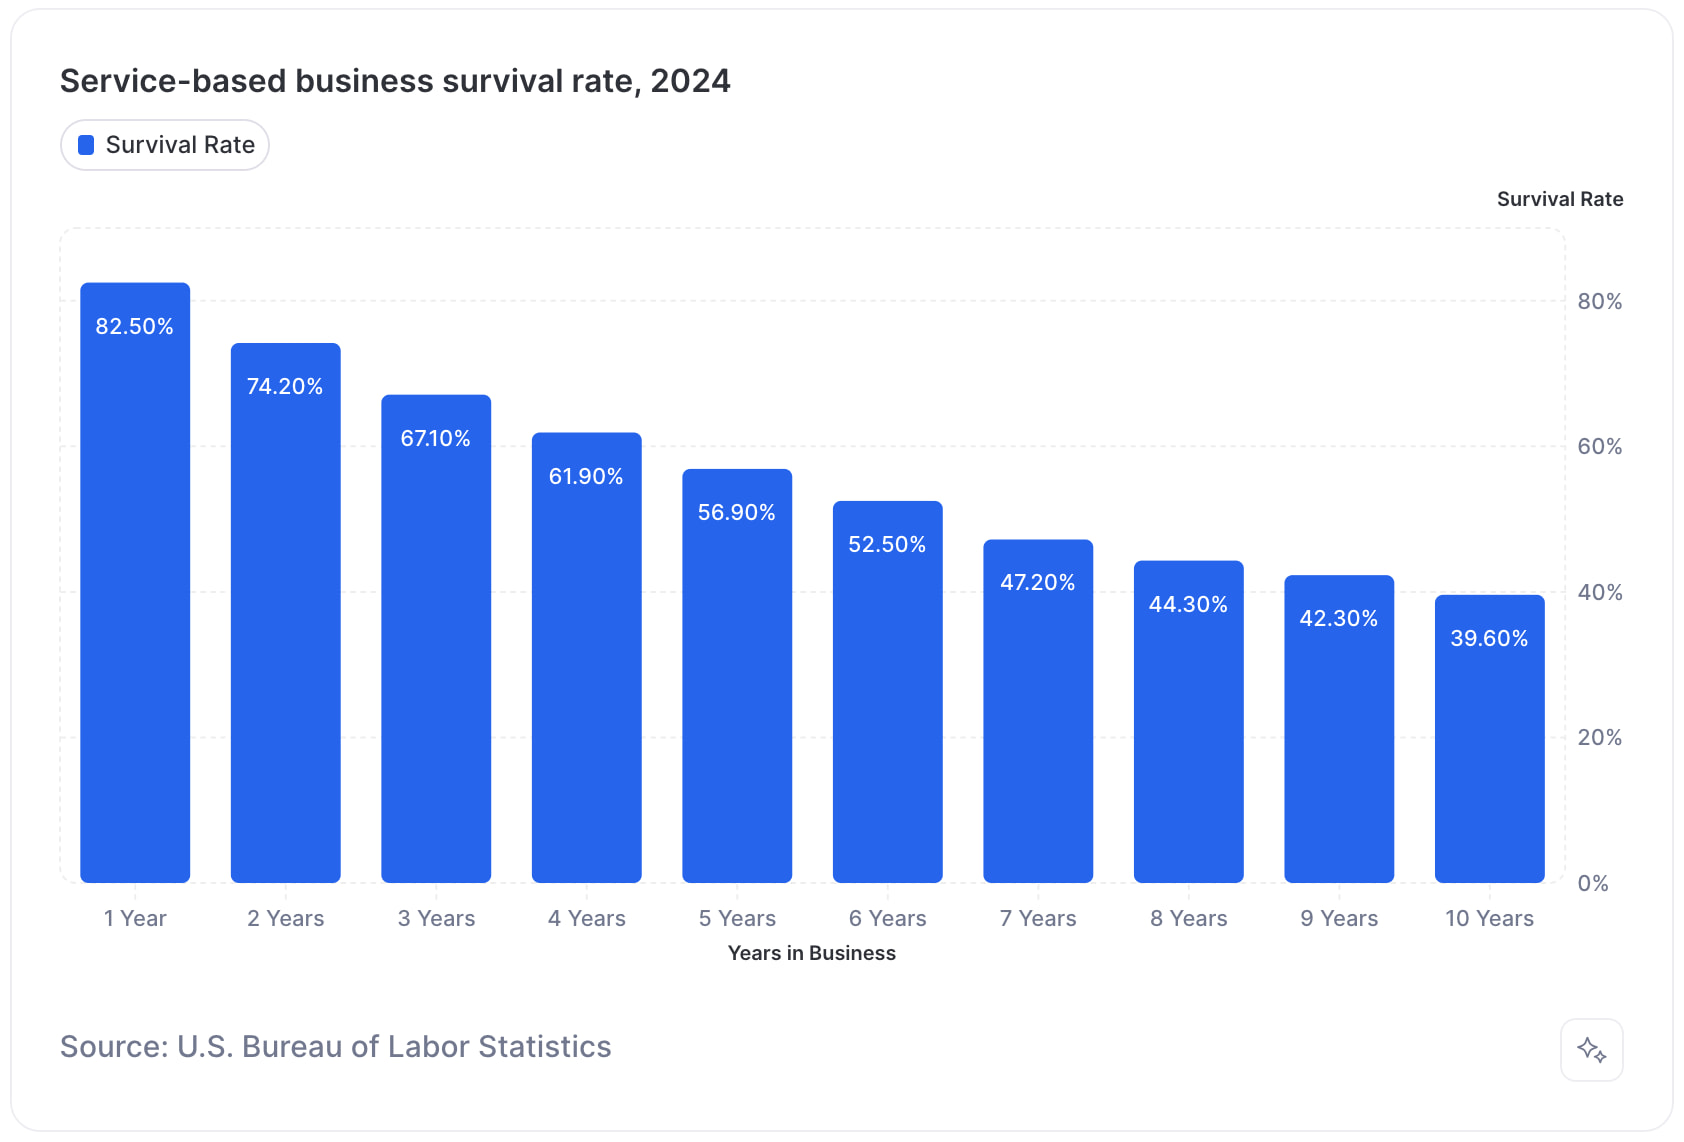 Chart showing the survival rate of service-based businesses